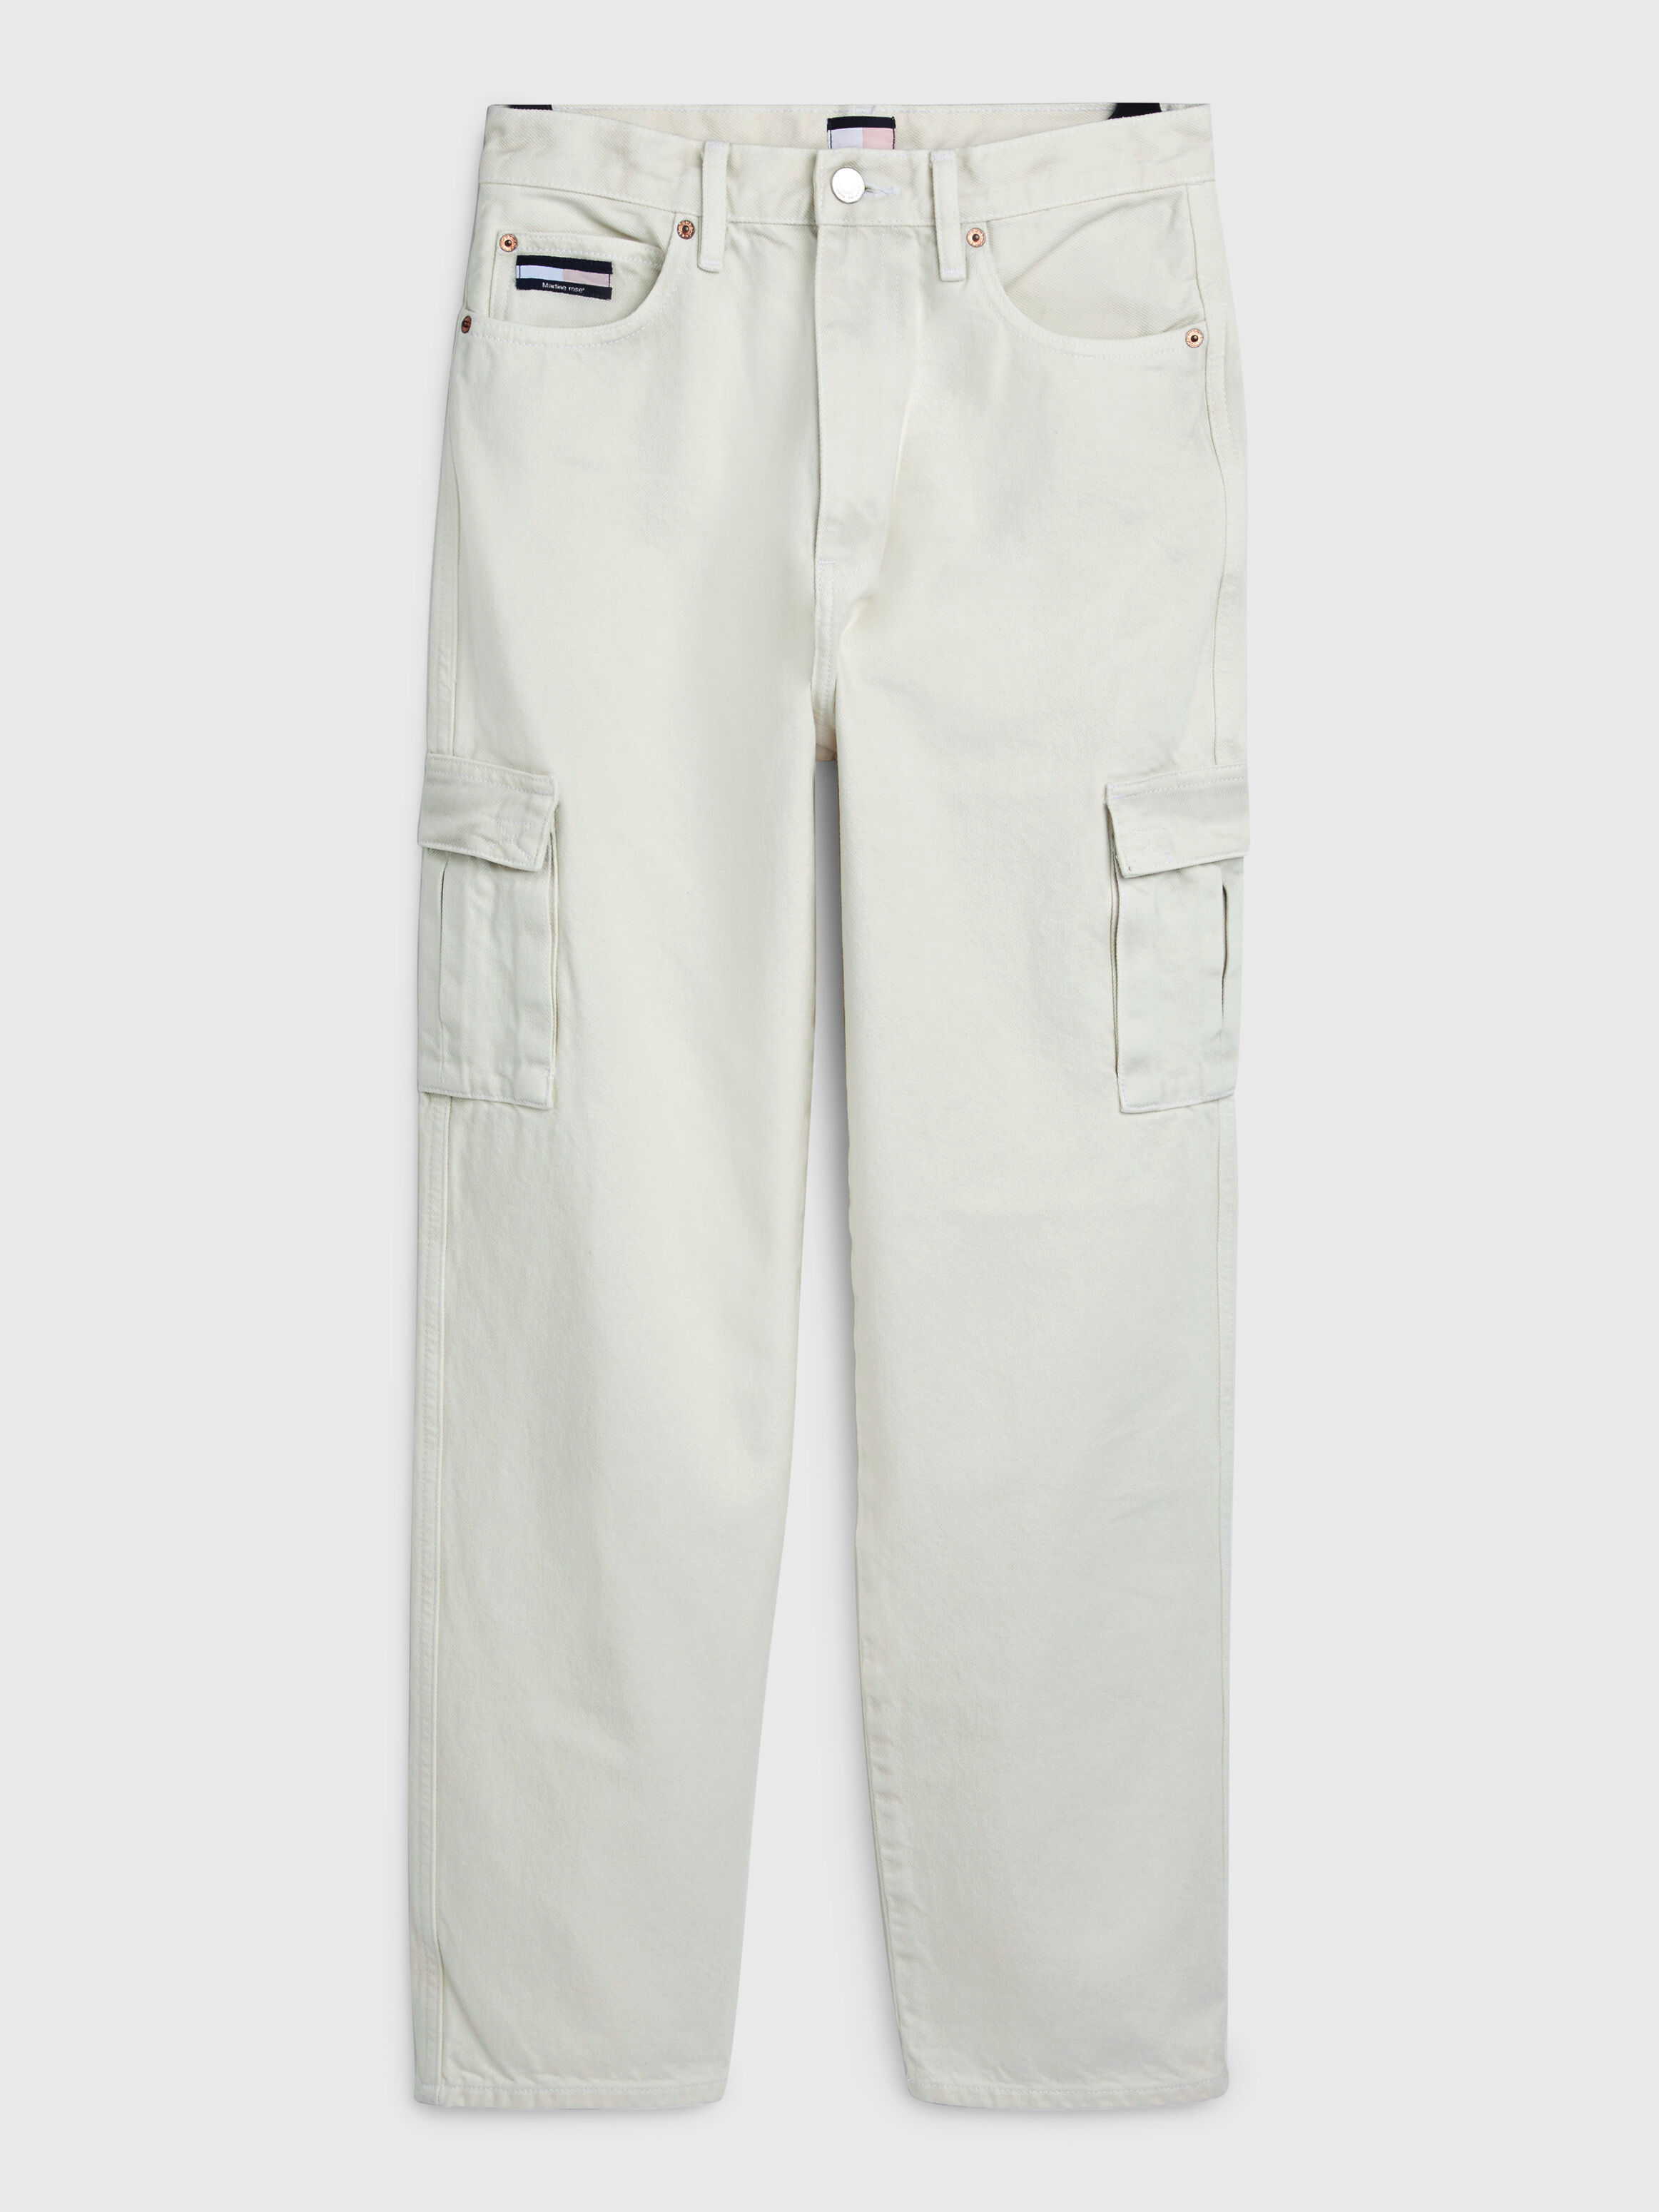 TOMMY X MARTINE ROSE DUAL GENDER WHITE JEANS | natural | Tommy 